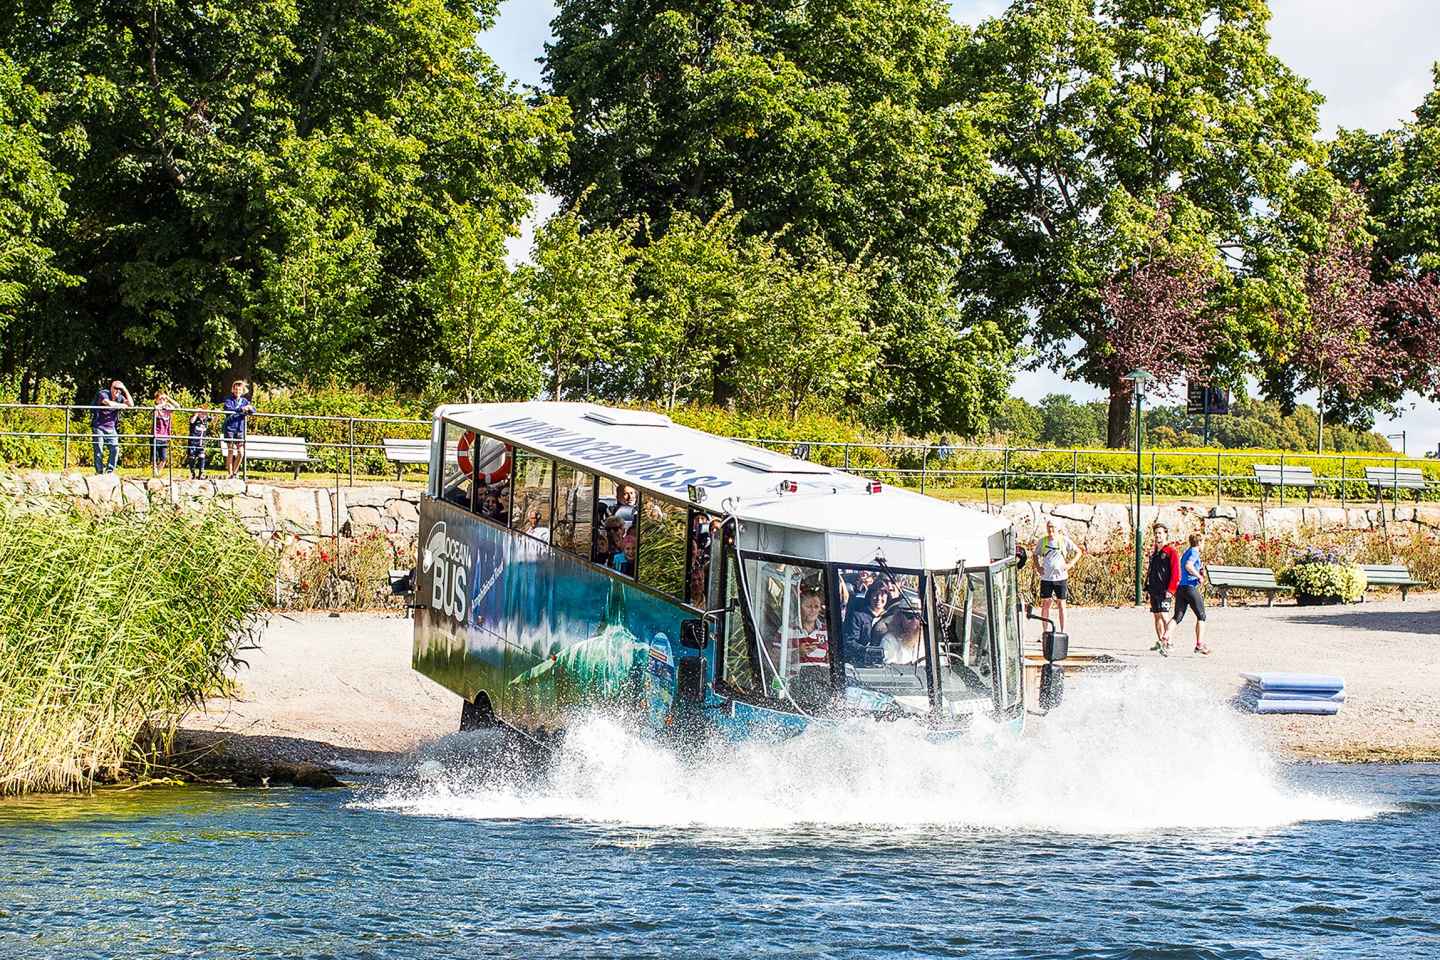 Stockholm: Land and Water Tour by Amphibious Bus